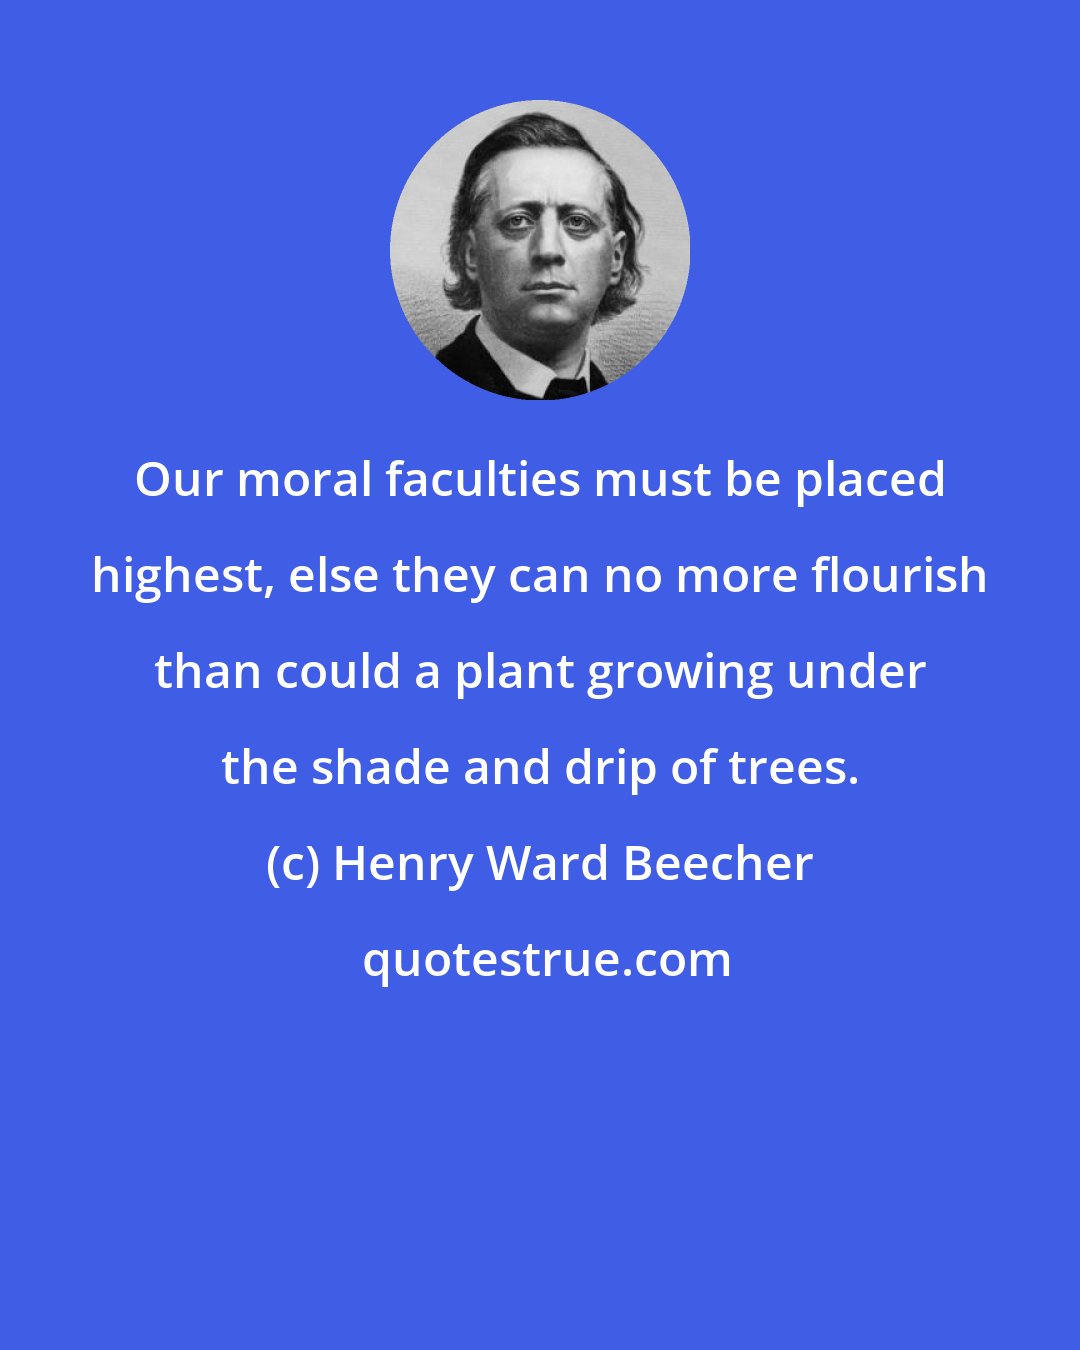 Henry Ward Beecher: Our moral faculties must be placed highest, else they can no more flourish than could a plant growing under the shade and drip of trees.